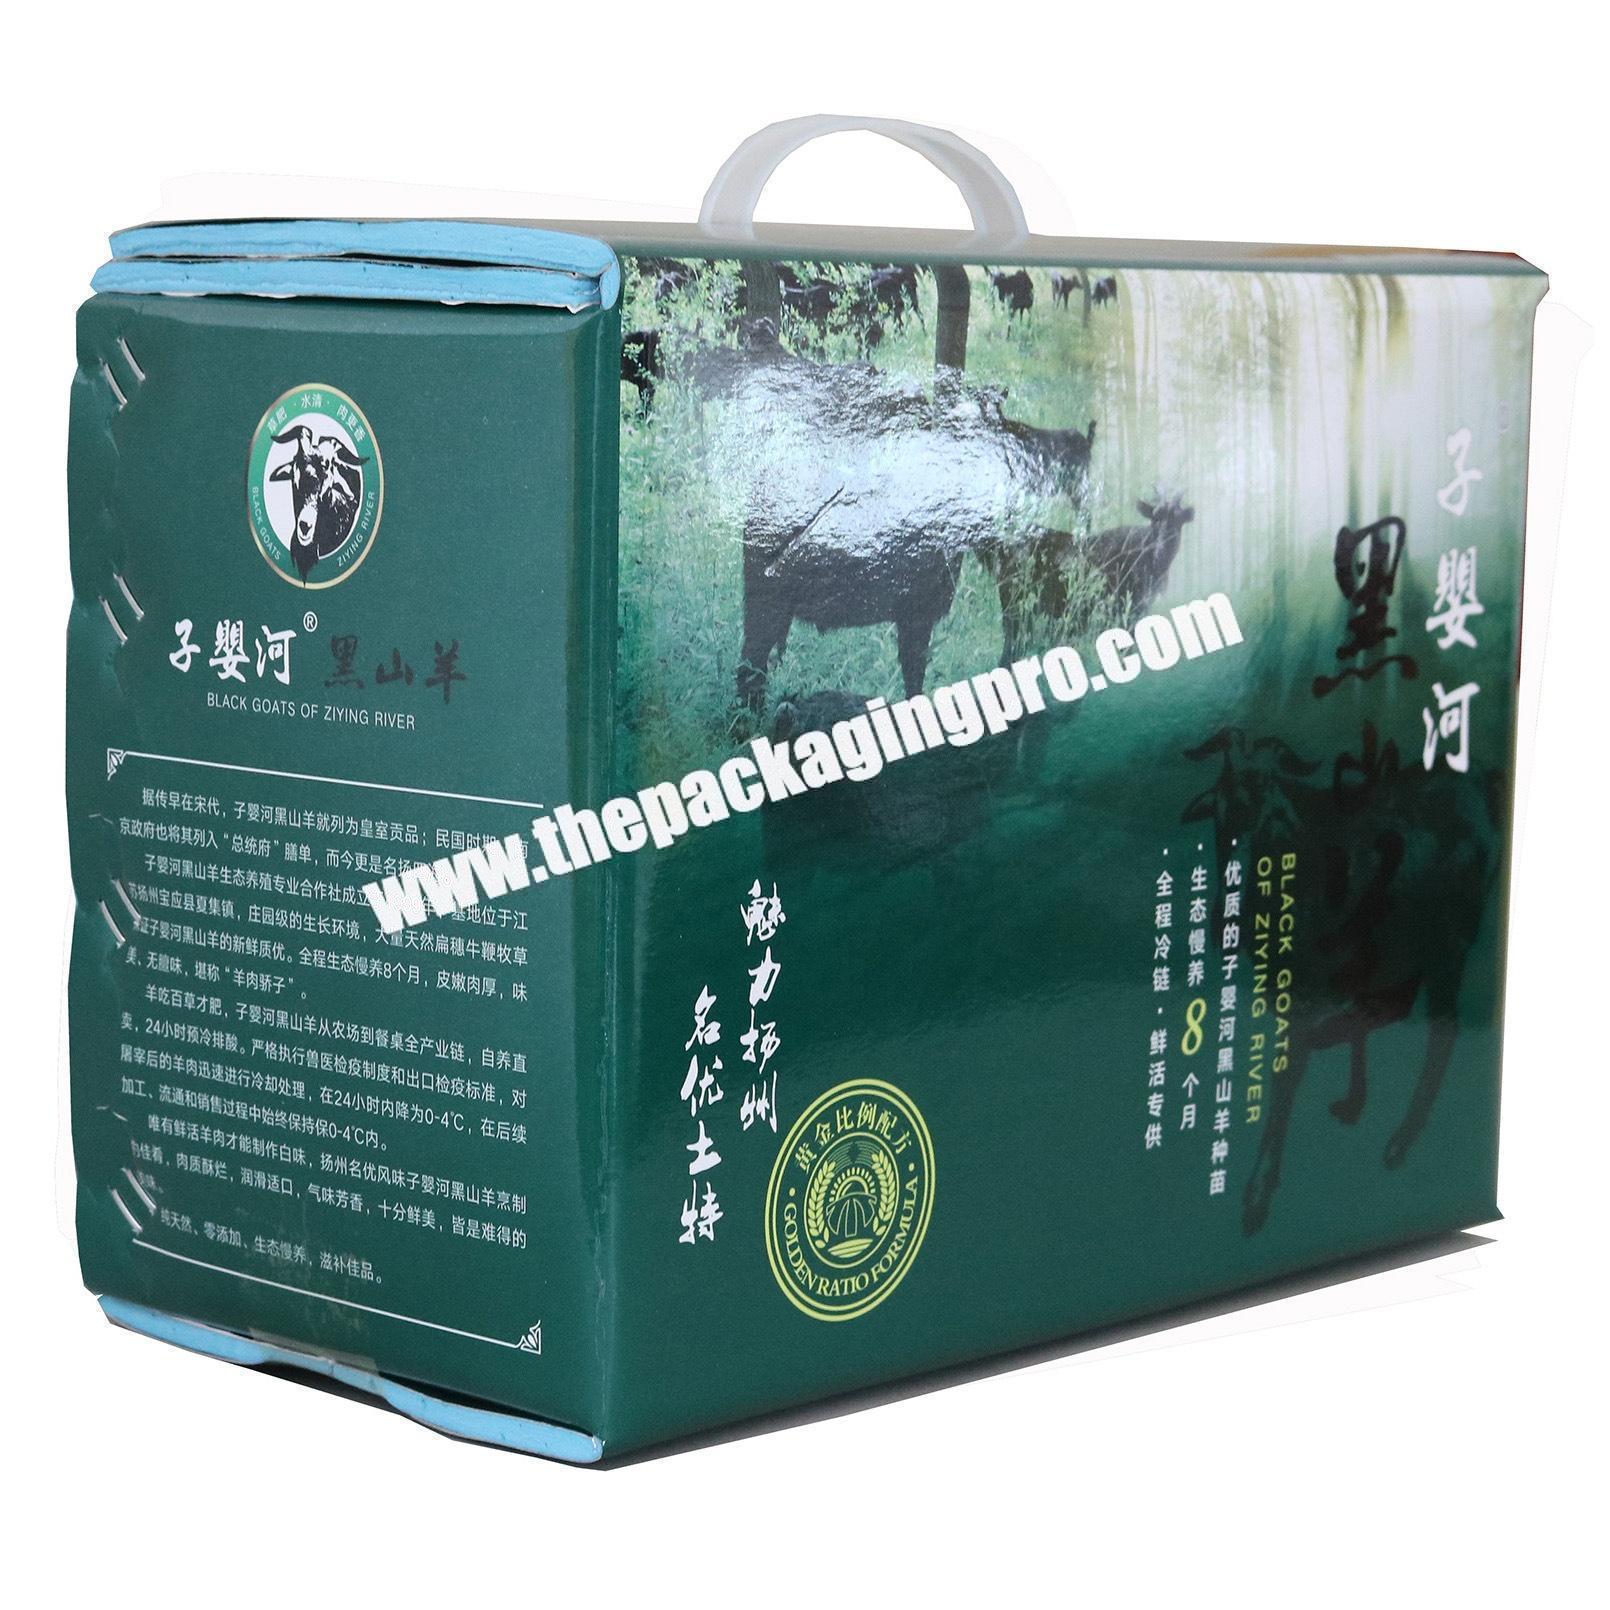 ECO stronger China frozen food packaging with bubble film organic fast food packaging